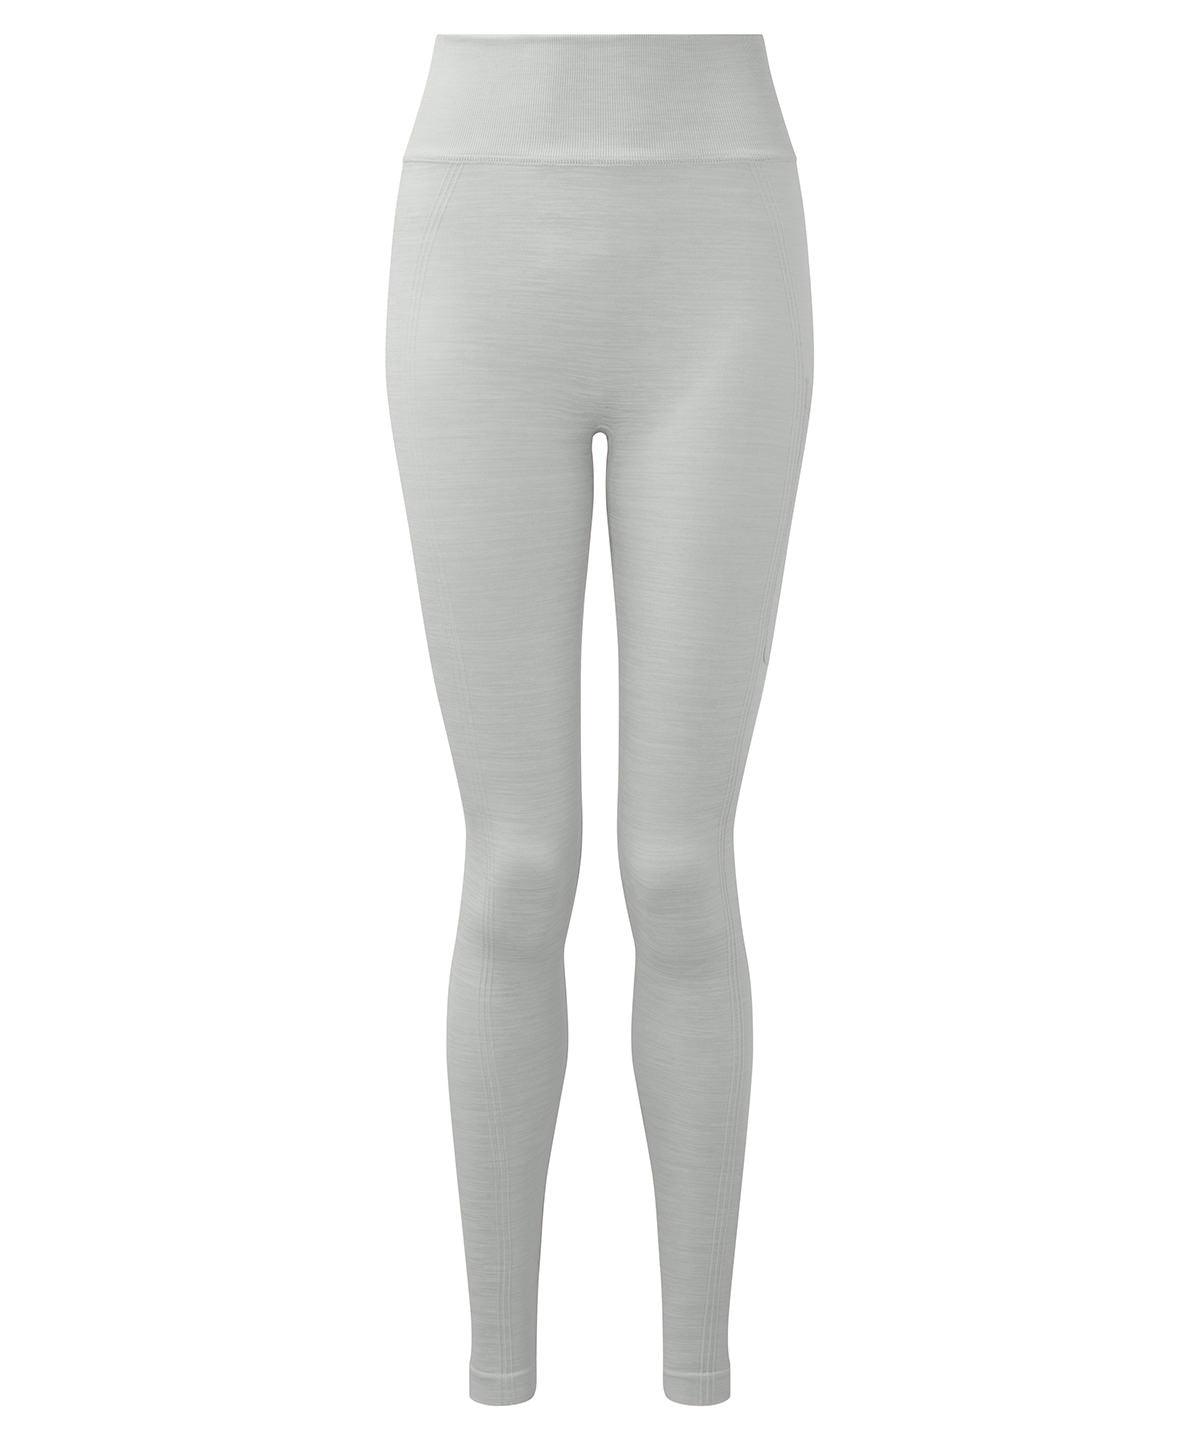 Cool Grey Melange - Women's TriDri® recycled seamless 3D fit multi-sport flex leggings Leggings TriDri® Activewear & Performance, Back to the Gym, Co-ords, Exclusives, Leggings, New Styles For 2022, Organic & Conscious, Trending, Women's Fashion Schoolwear Centres